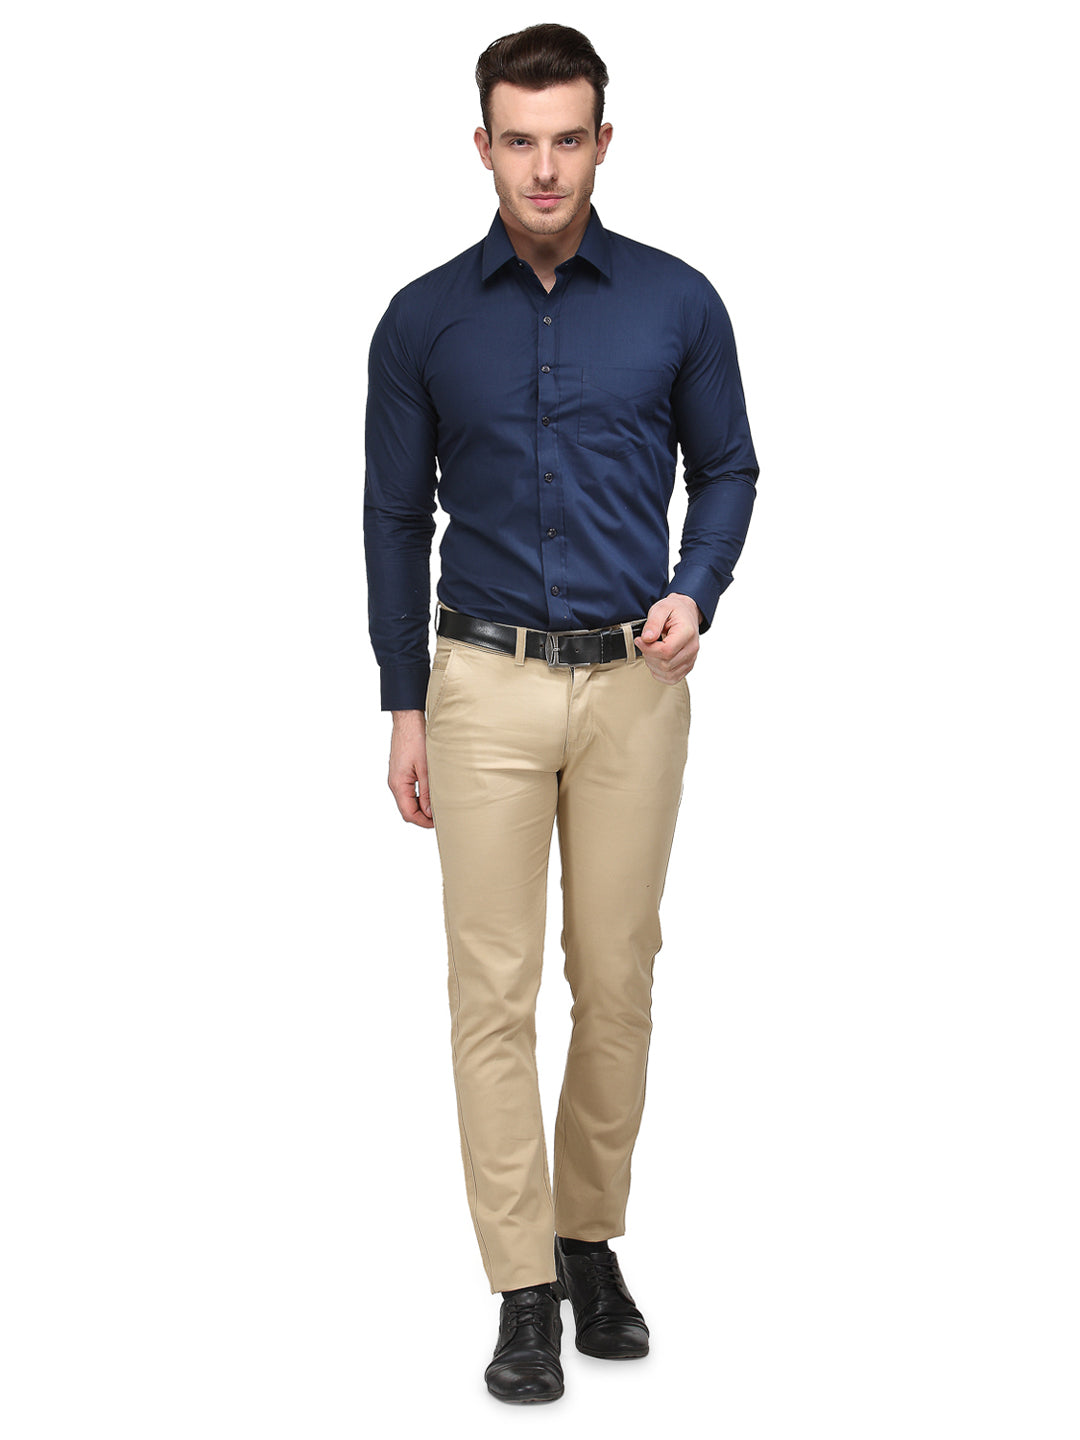 Can I wear a navy blue shirt with black pants and brown shoes? - Quora